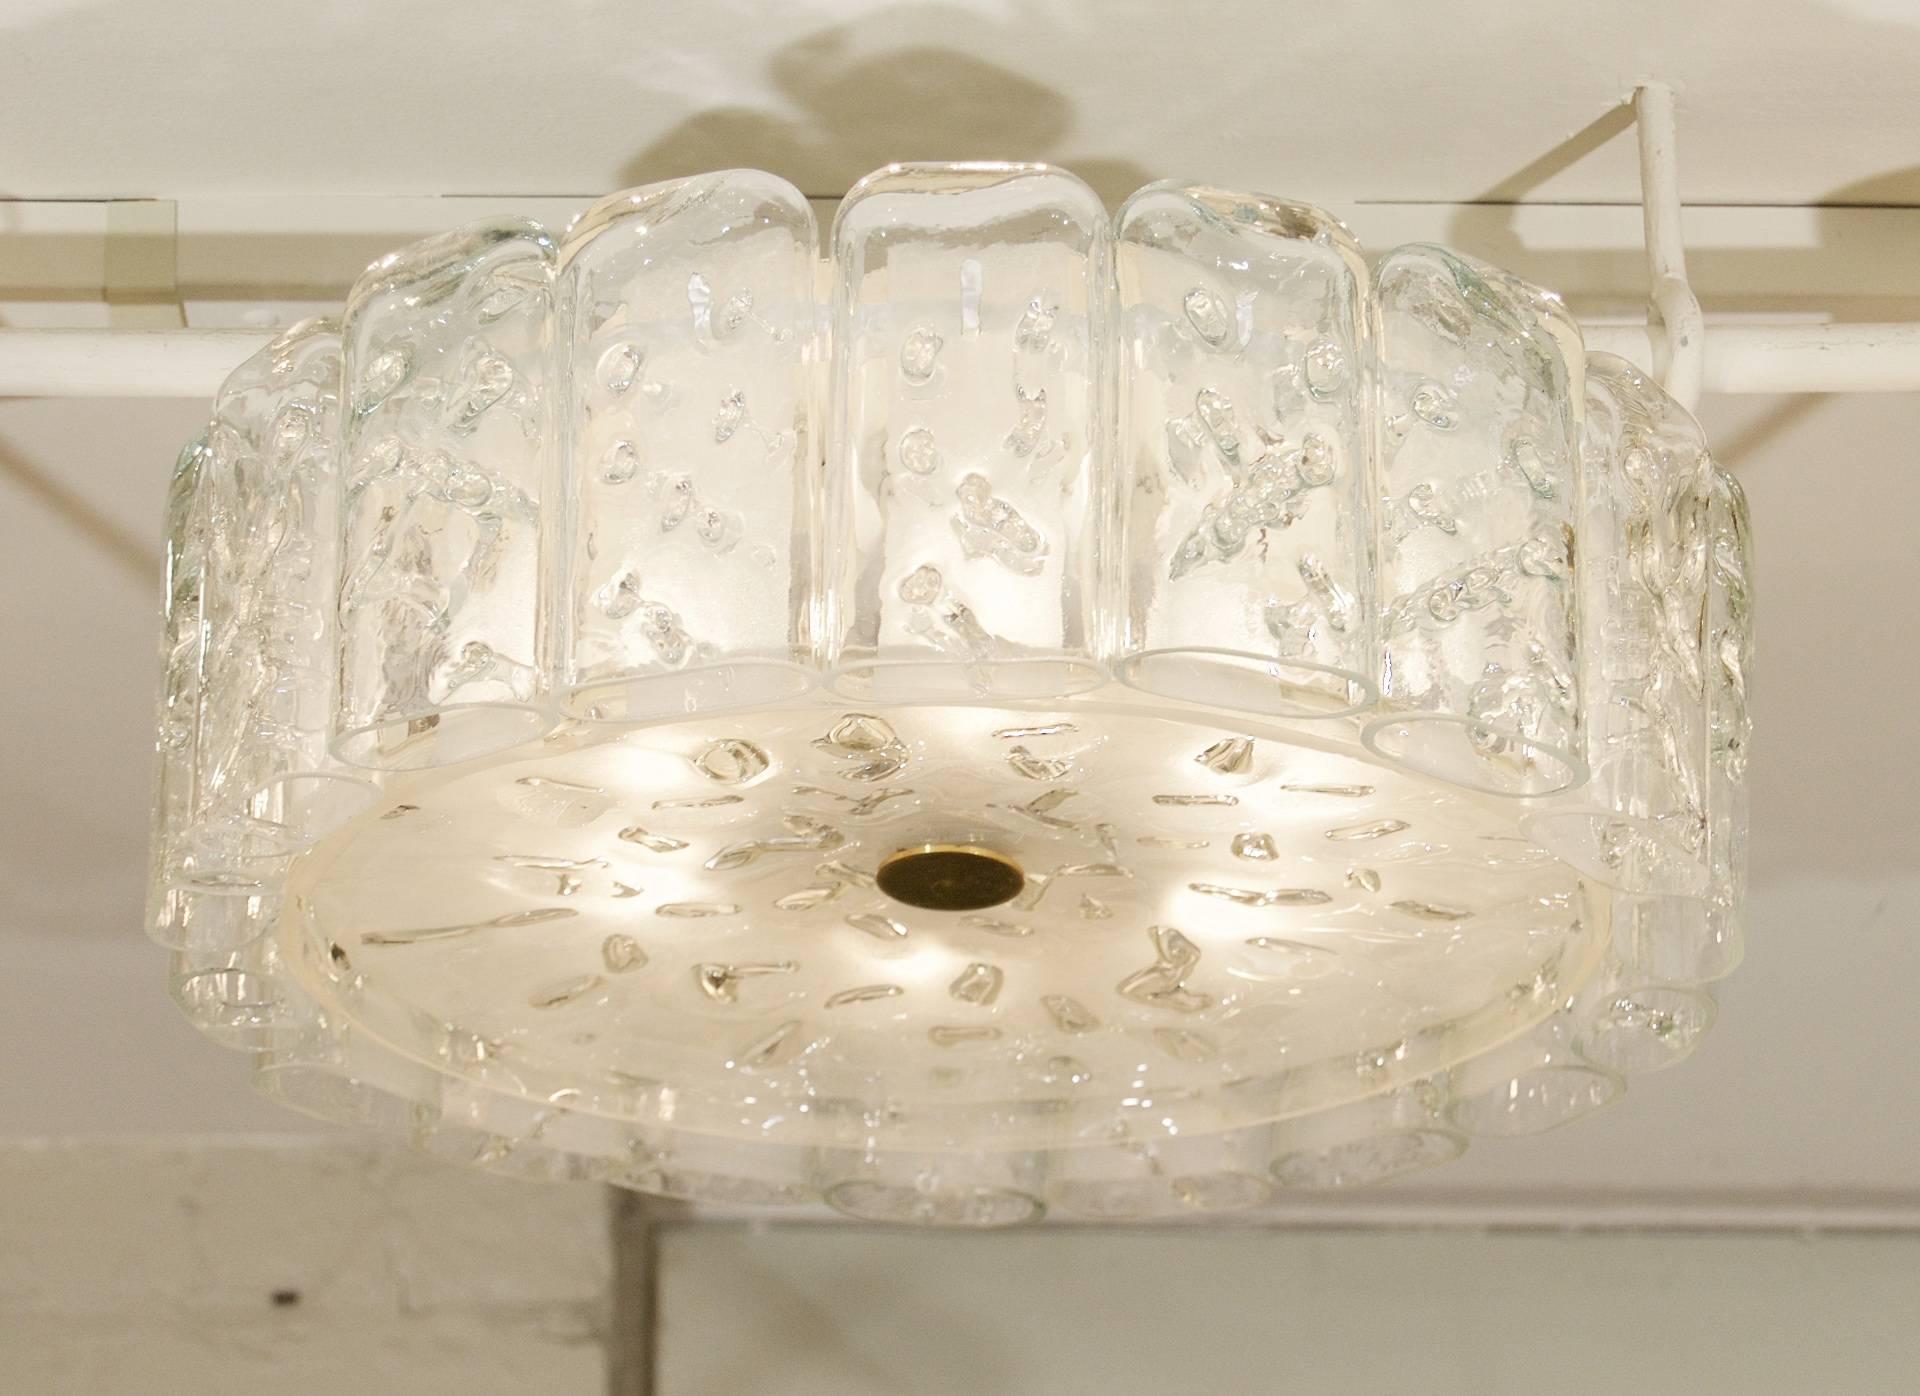 Excellent Doria flush mount chandelier, the organic glass tubes surrounding a central glass disc. Brass hardware.

Takes 6 E-14 base bulbs up to 40 watts per bulb, new wiring